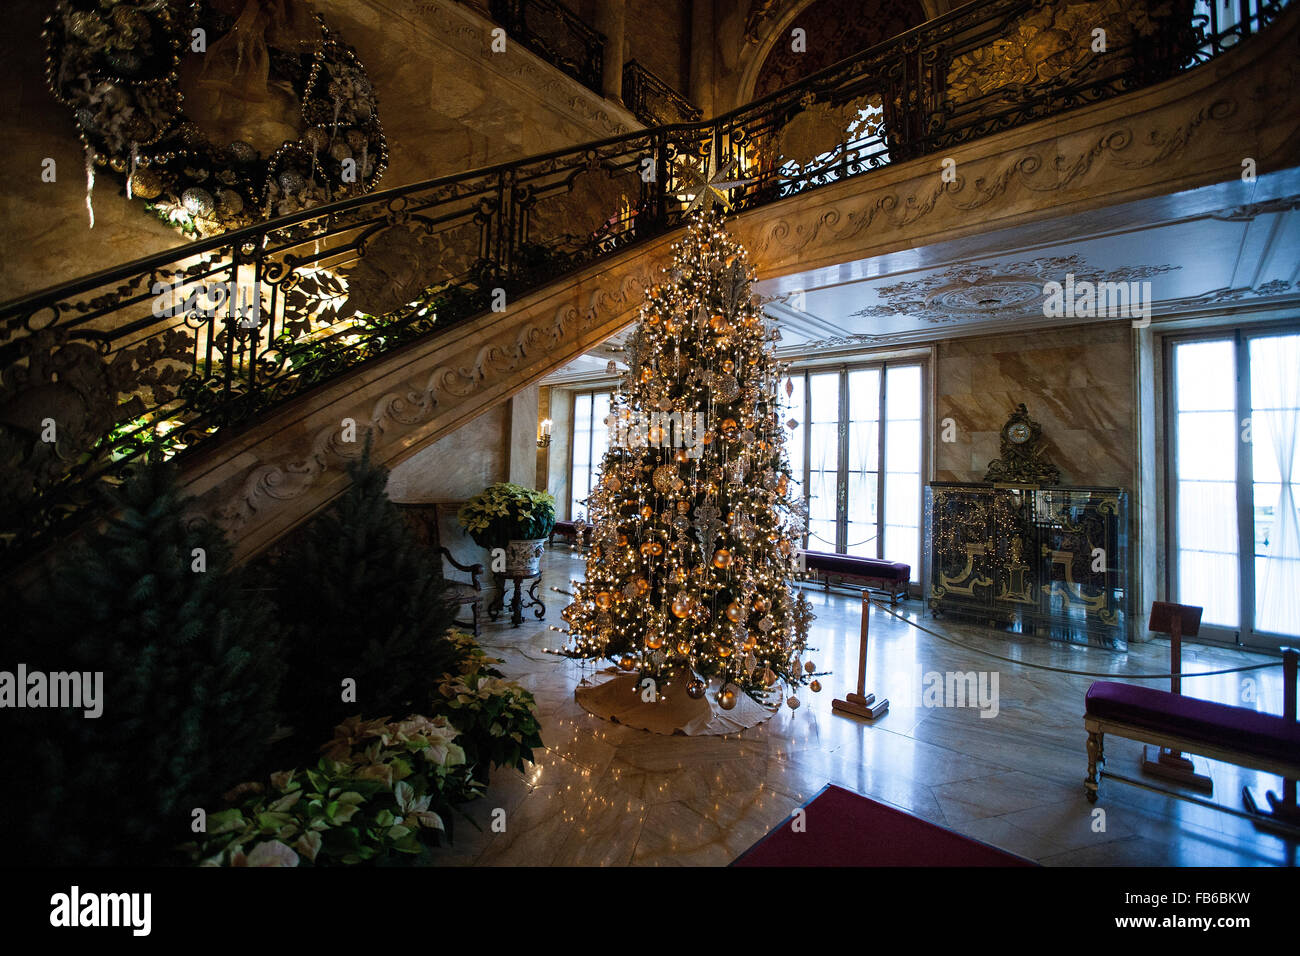 Christmas tree and stairway, Marble House, Newport, Rhode Island, United States of America Stock Photo